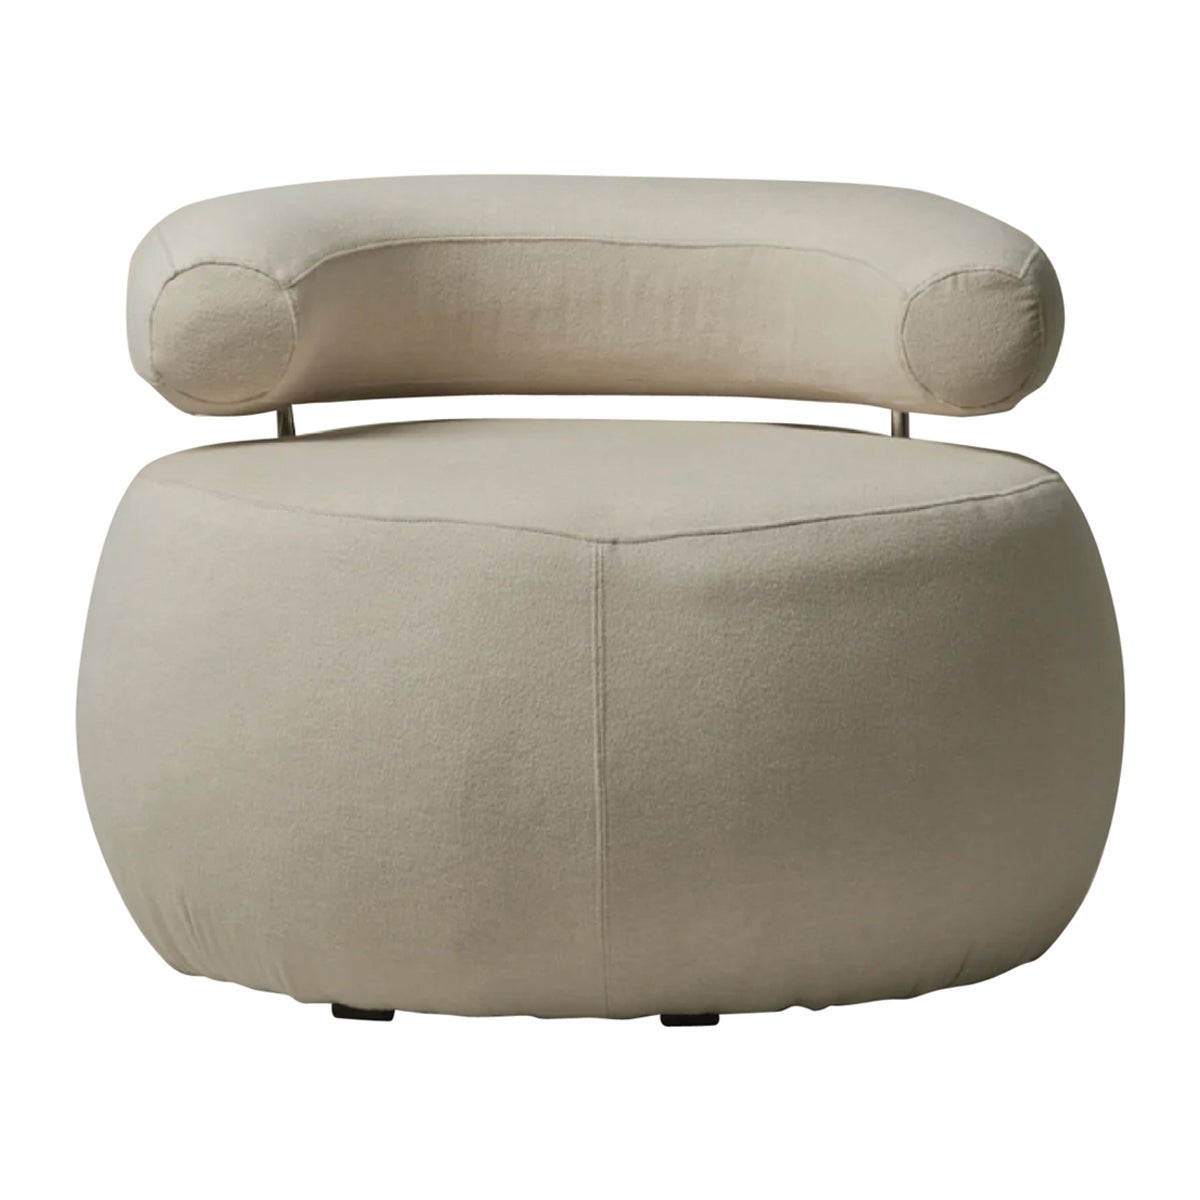 Atrio Vintage Roche Bobois Style Pouf Lounge Chair in Cashmere, 1970s For Sale